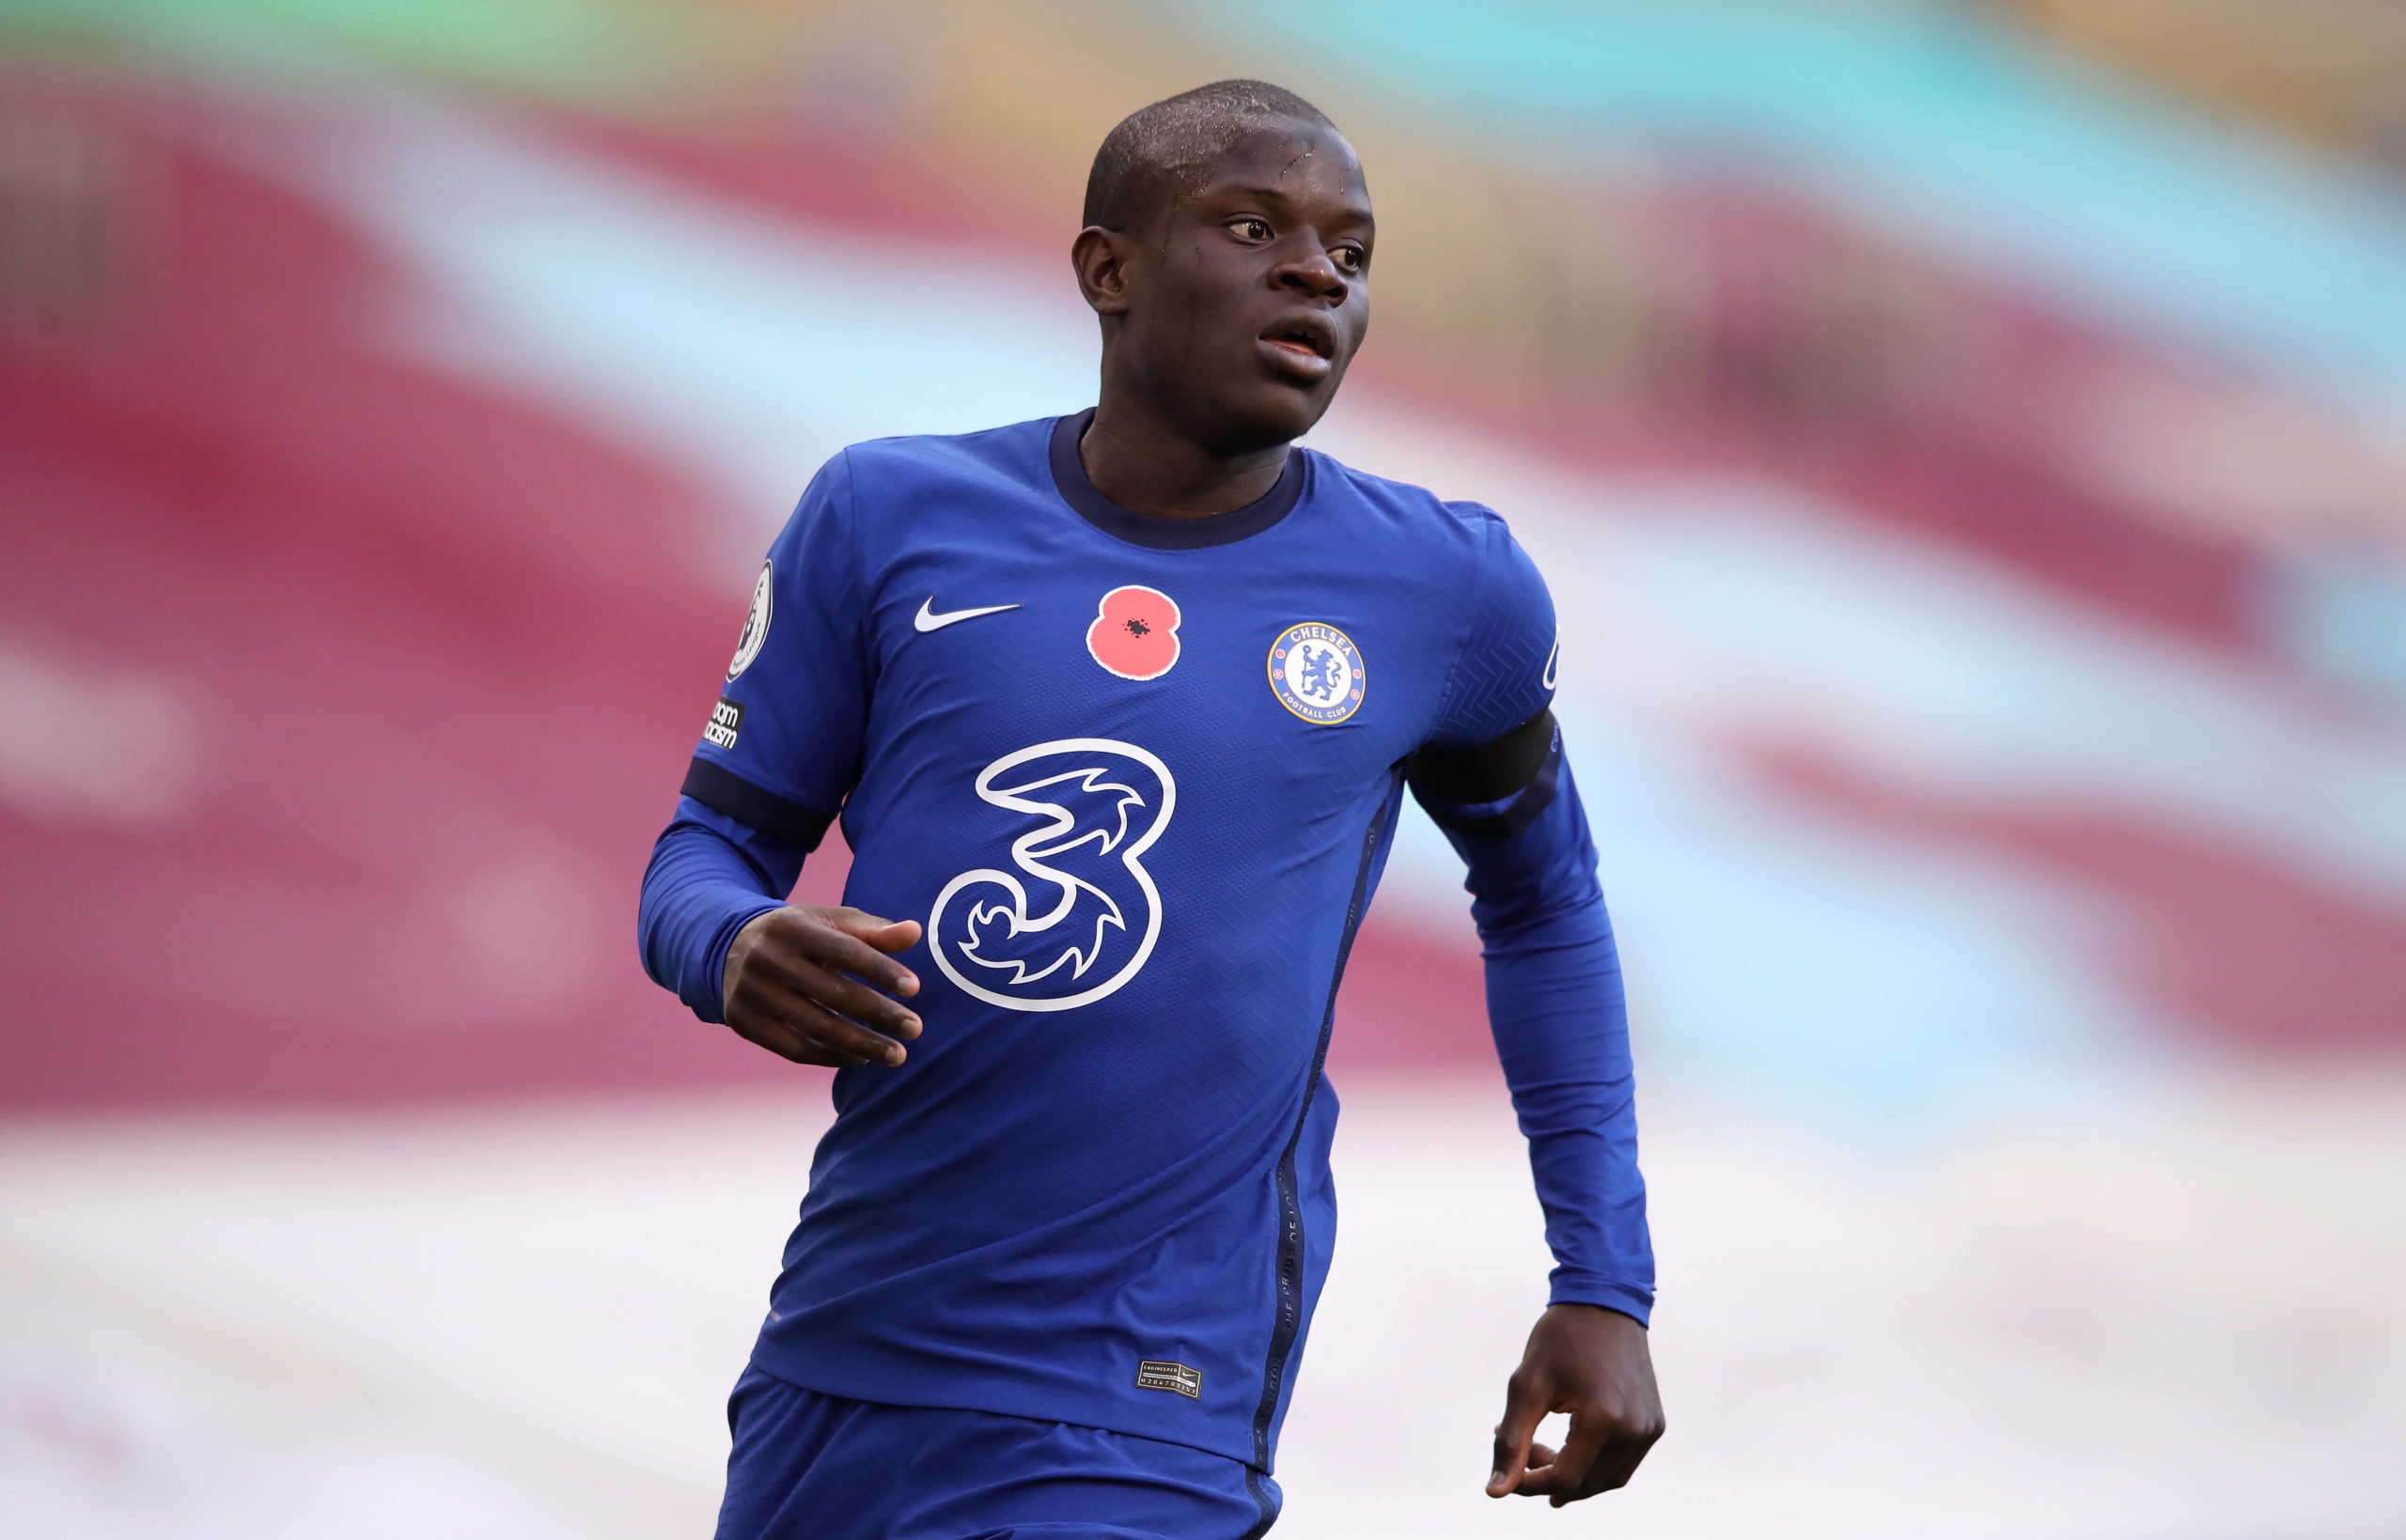 Chelsea's Kante set to be fit for Tottenham Hotspur clash (Kante is seen in the picture)